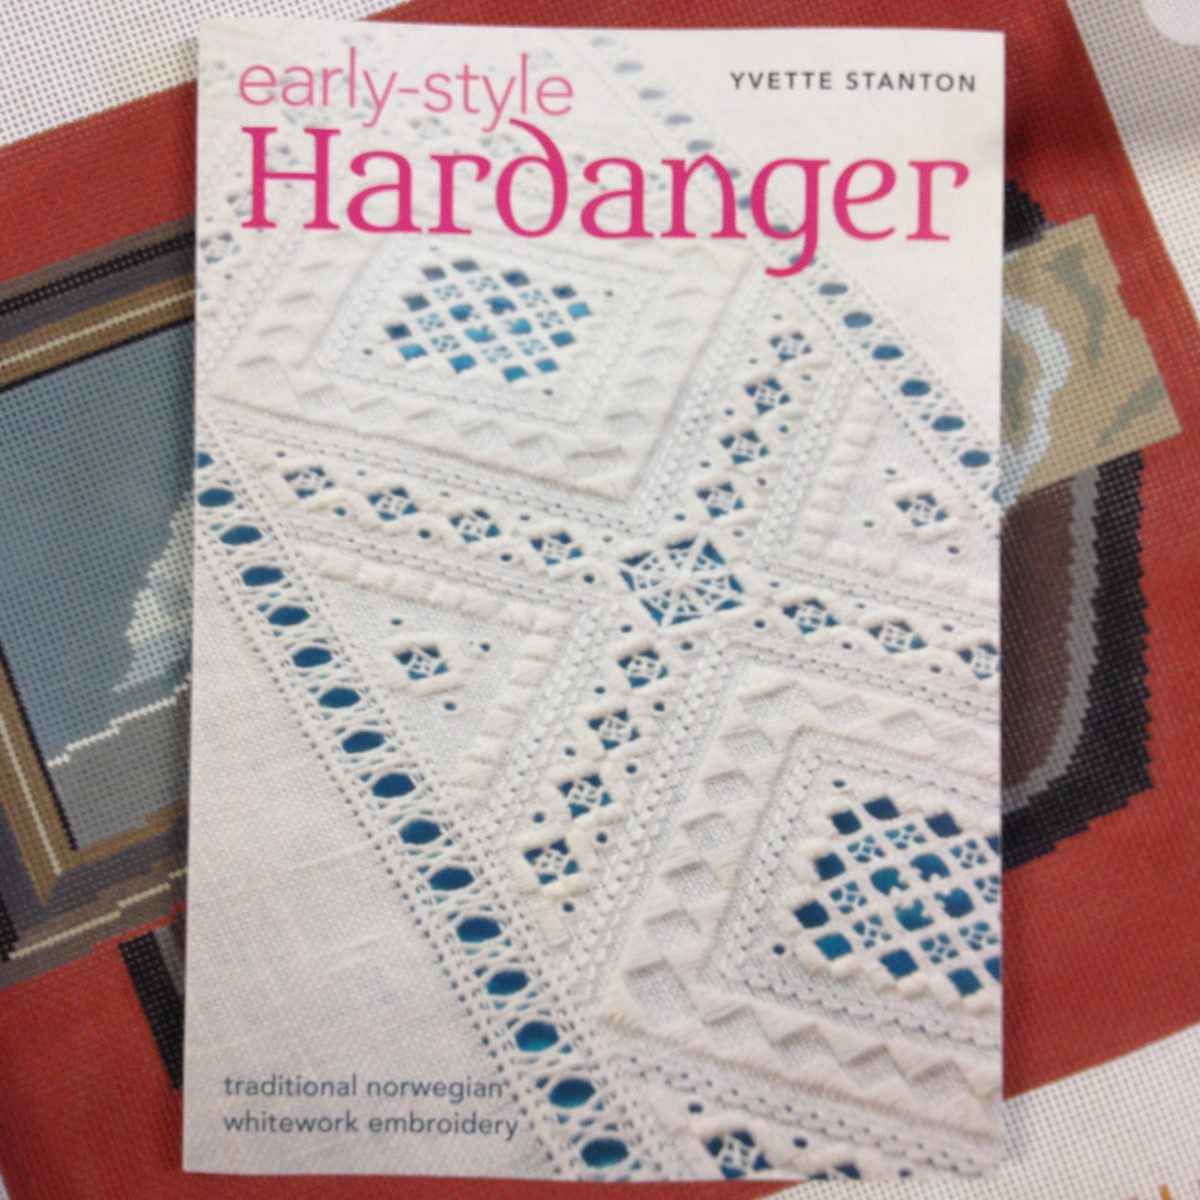 Everything you need for hardanger embroidery